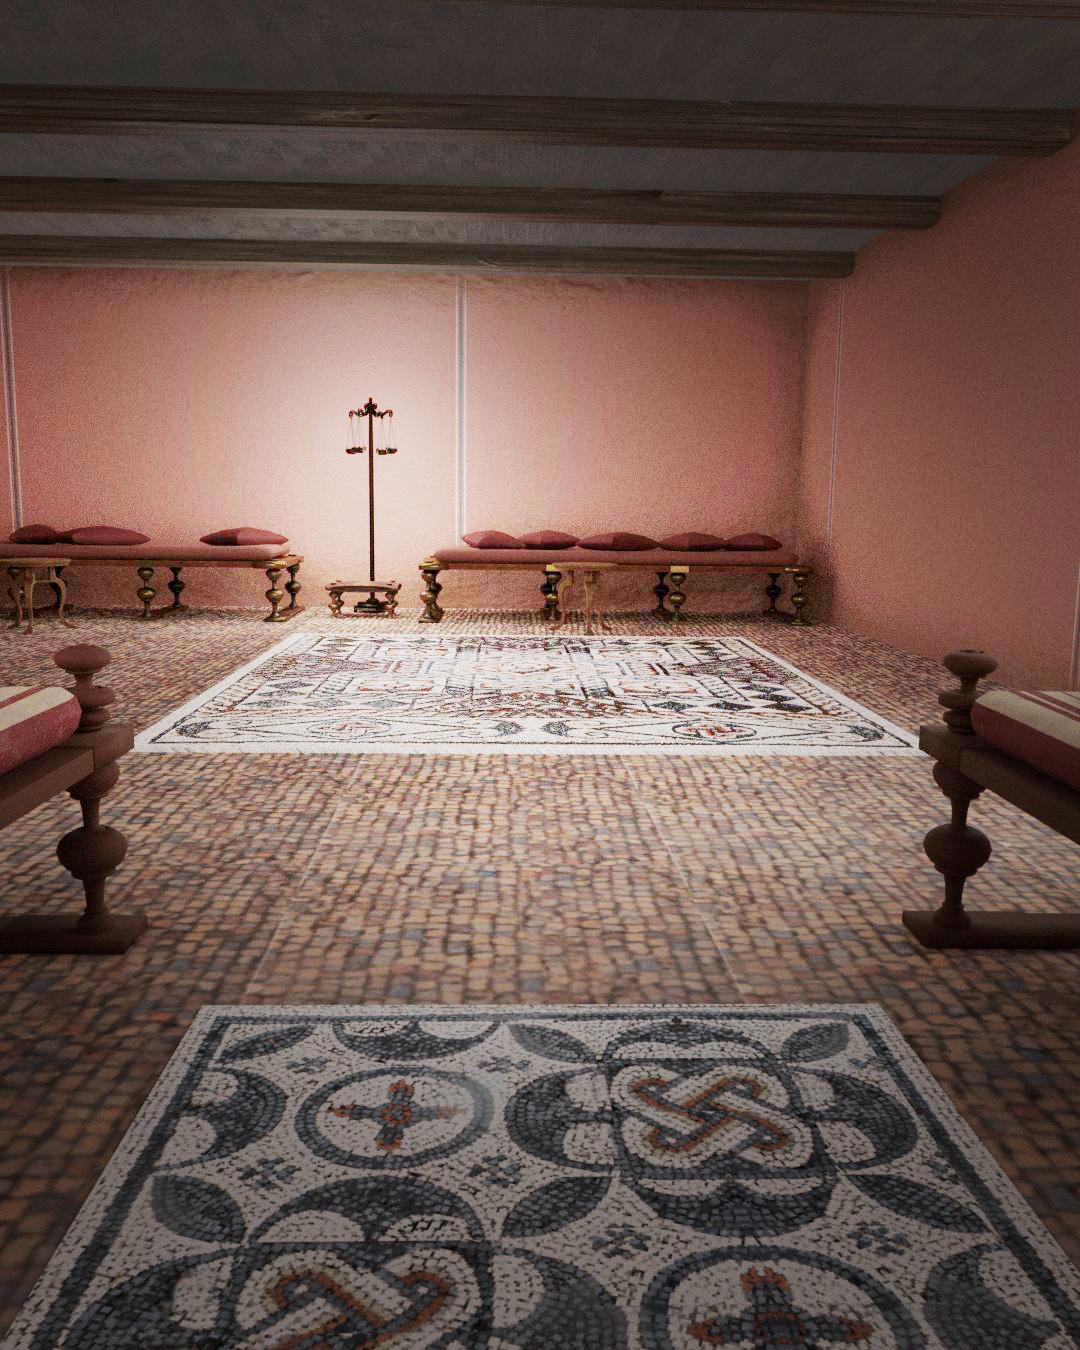 A 3D reconstruction of the mansio and mosaic shows reclining furniture. (Courtesy of <a href="https://www.mola.org.uk/">MOLA</a>)